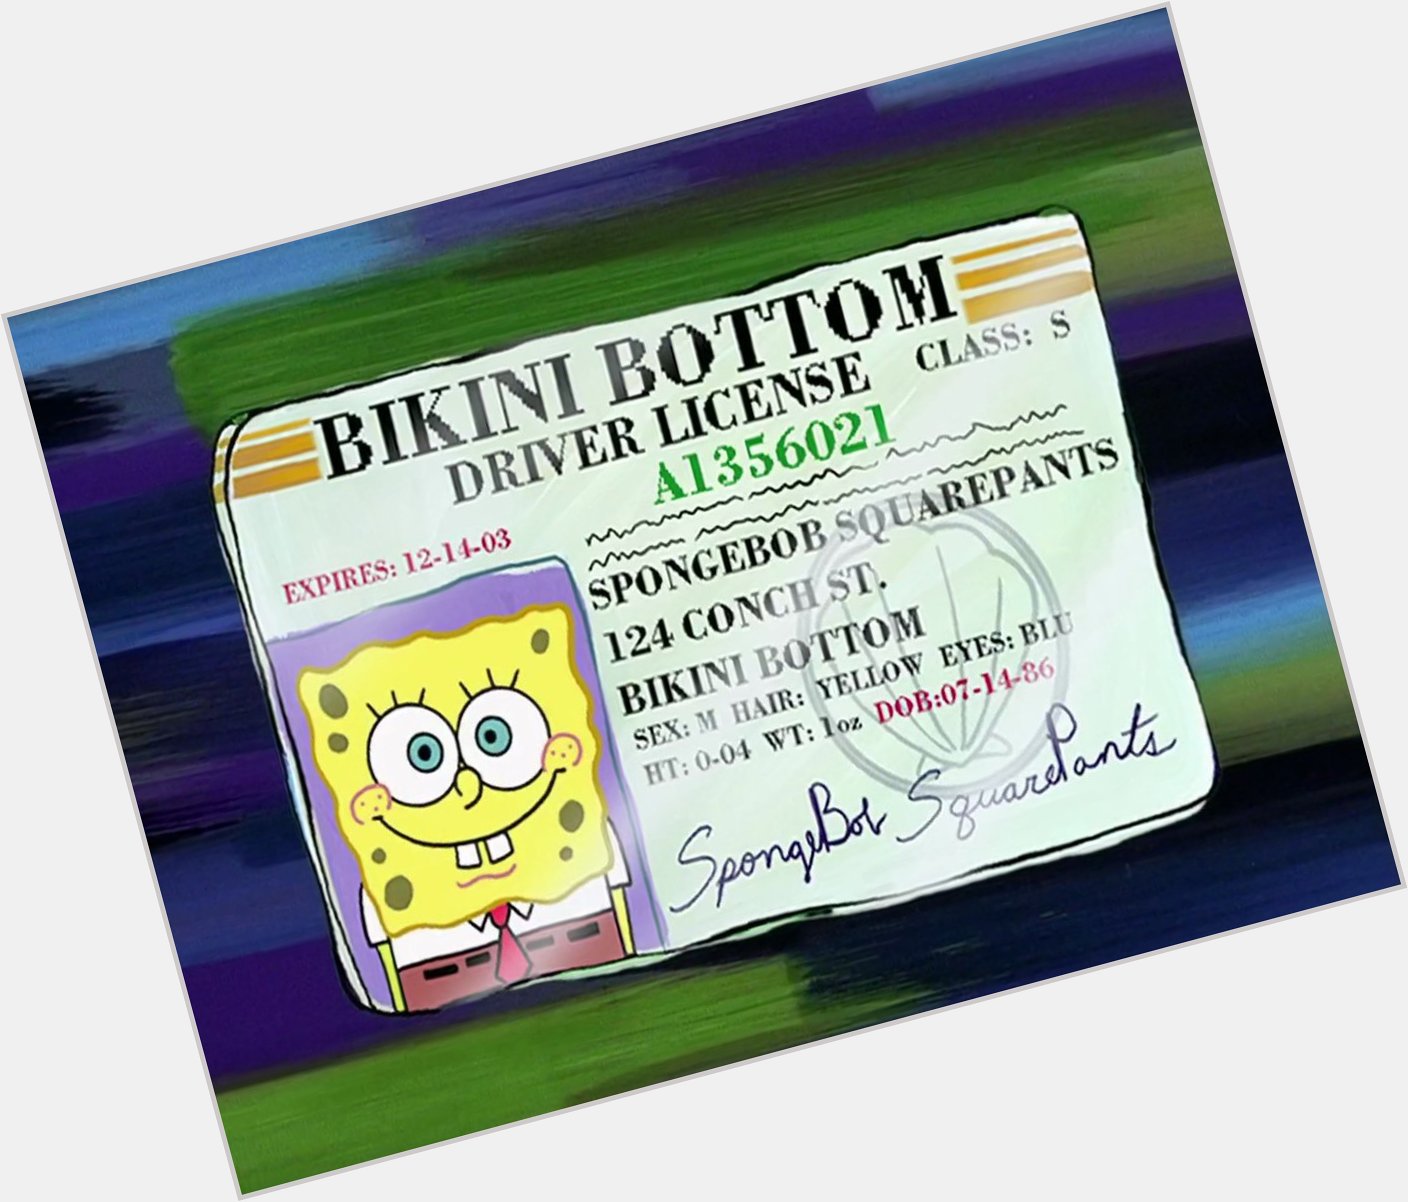 Happy birthday Mr Spongebob Squarepants, more blessings to you and more money to your account 